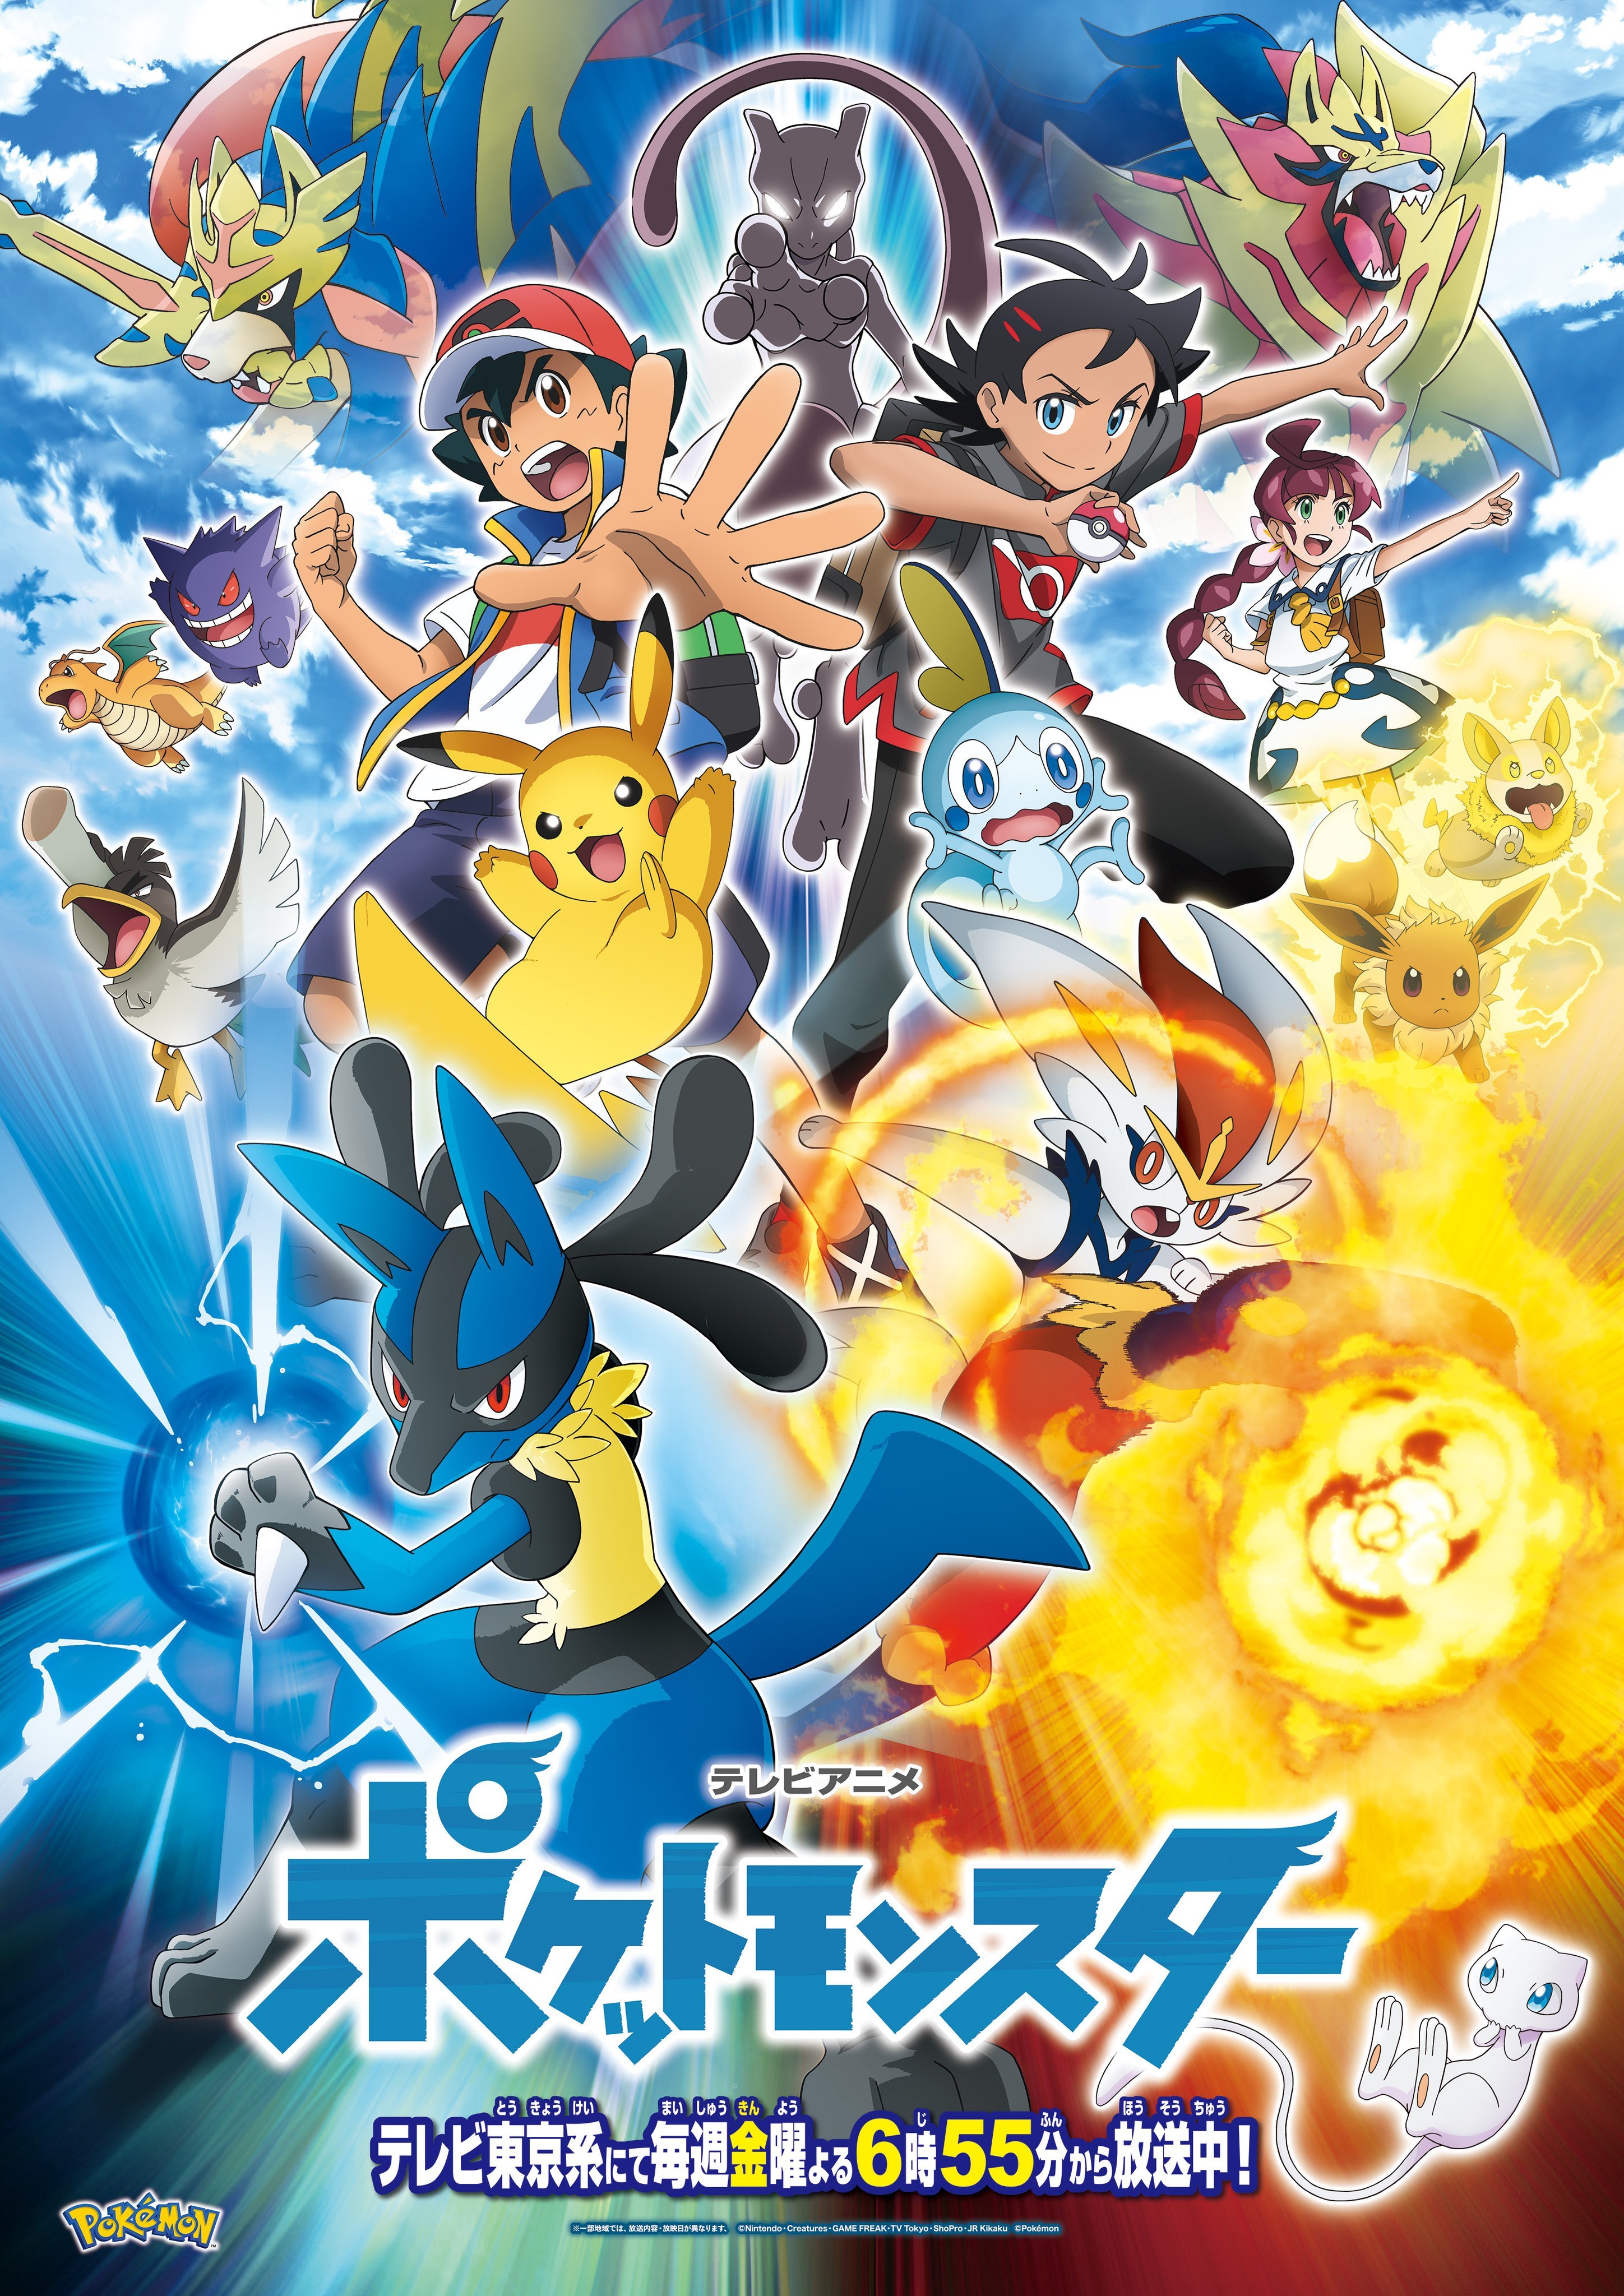 Video Episode 48 Of Pokemon Journeys The Series Airs On December 4 In Japan New Trailer Out Now Pokemon Blog